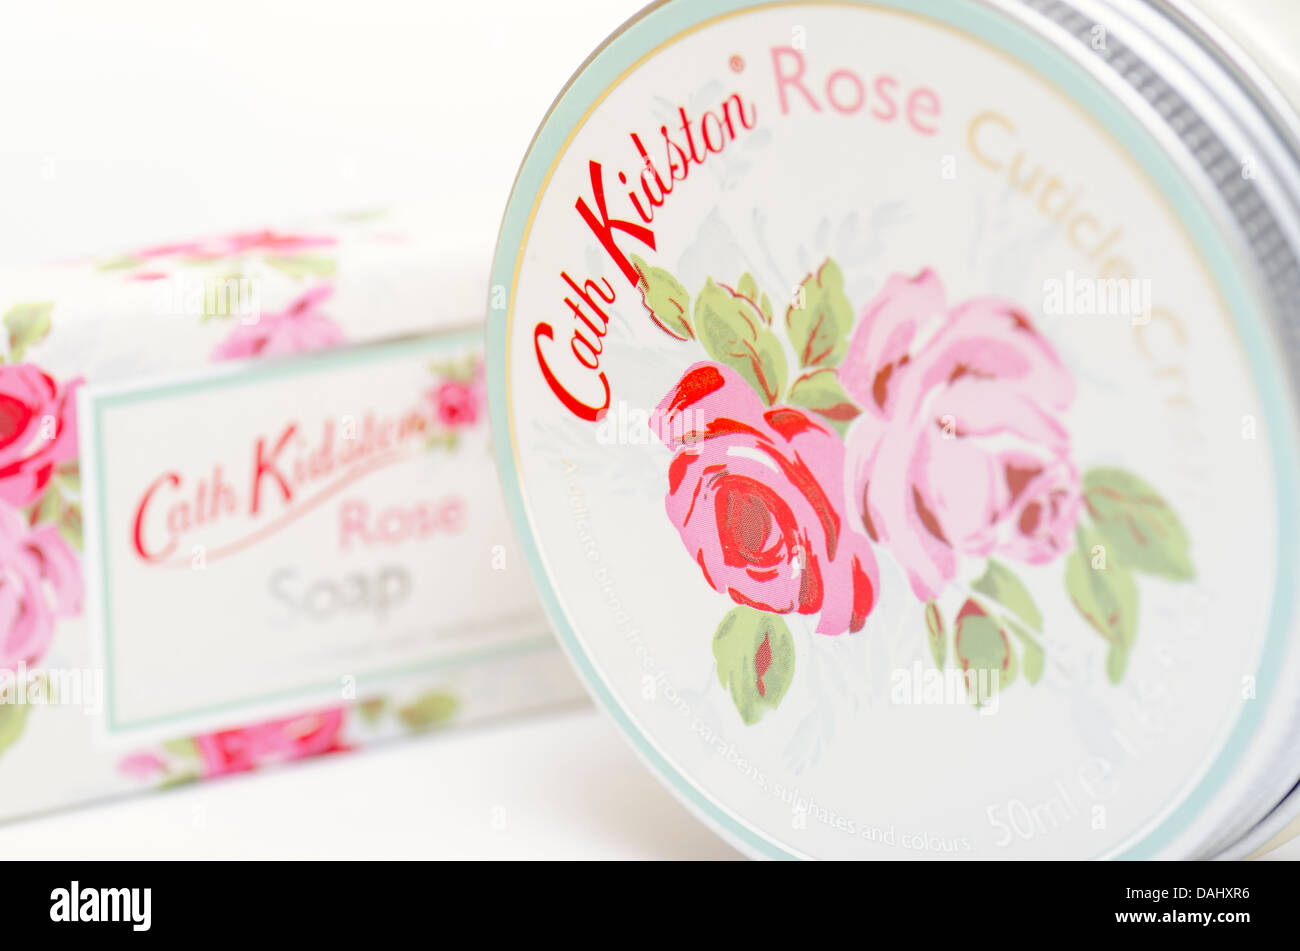 Cath Kidston rose soap and cuticle 